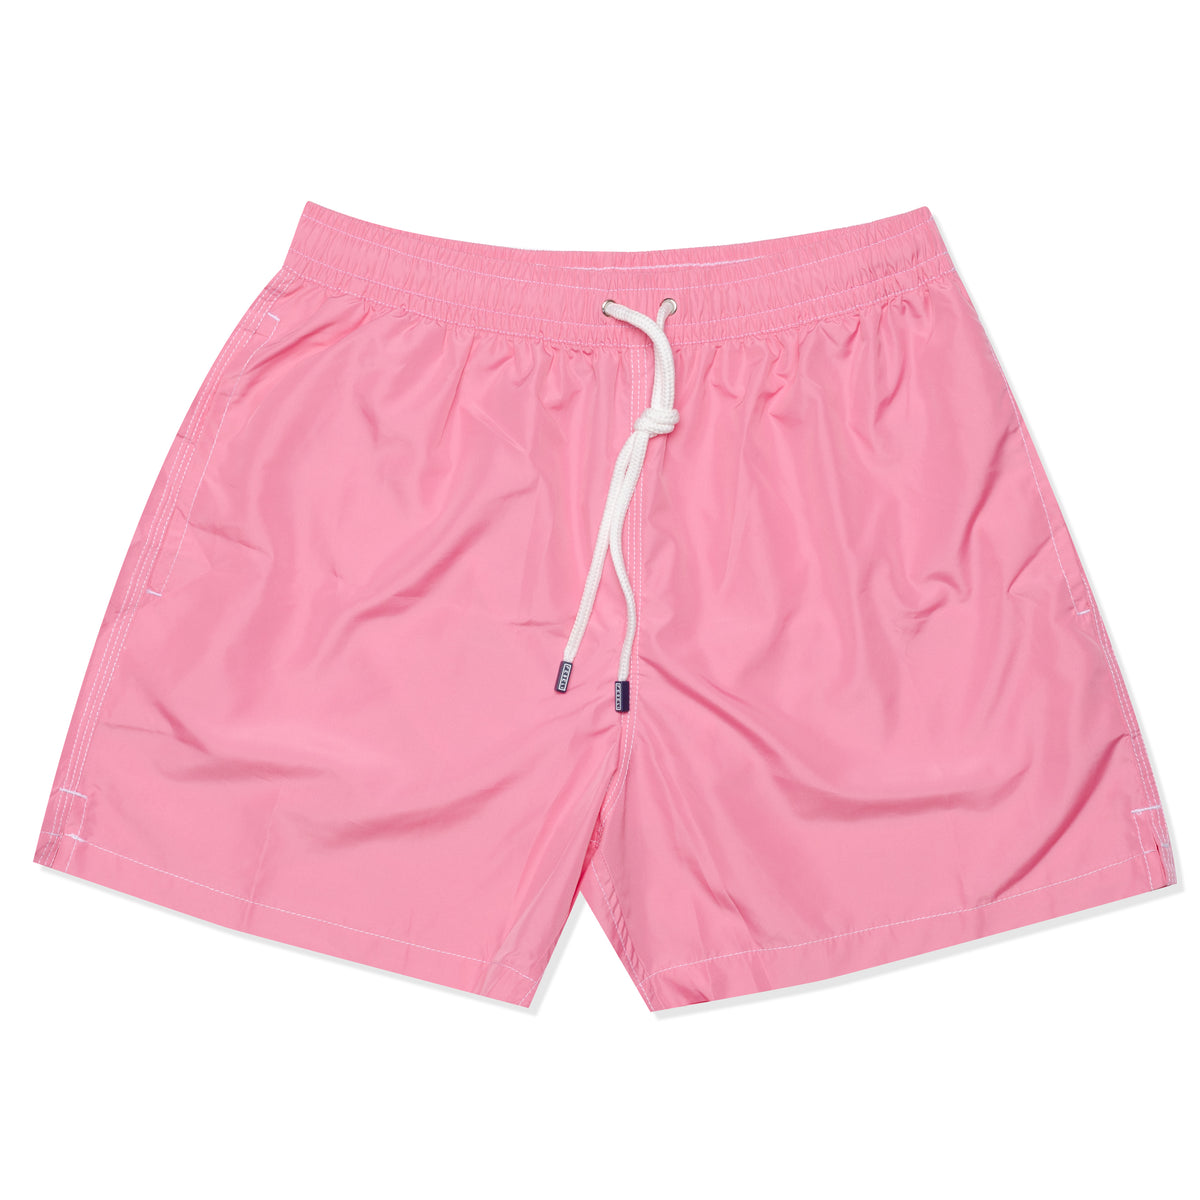 FEDELI Pink Madeira Airstop Swim Shorts Trunks NEW – SARTORIALE